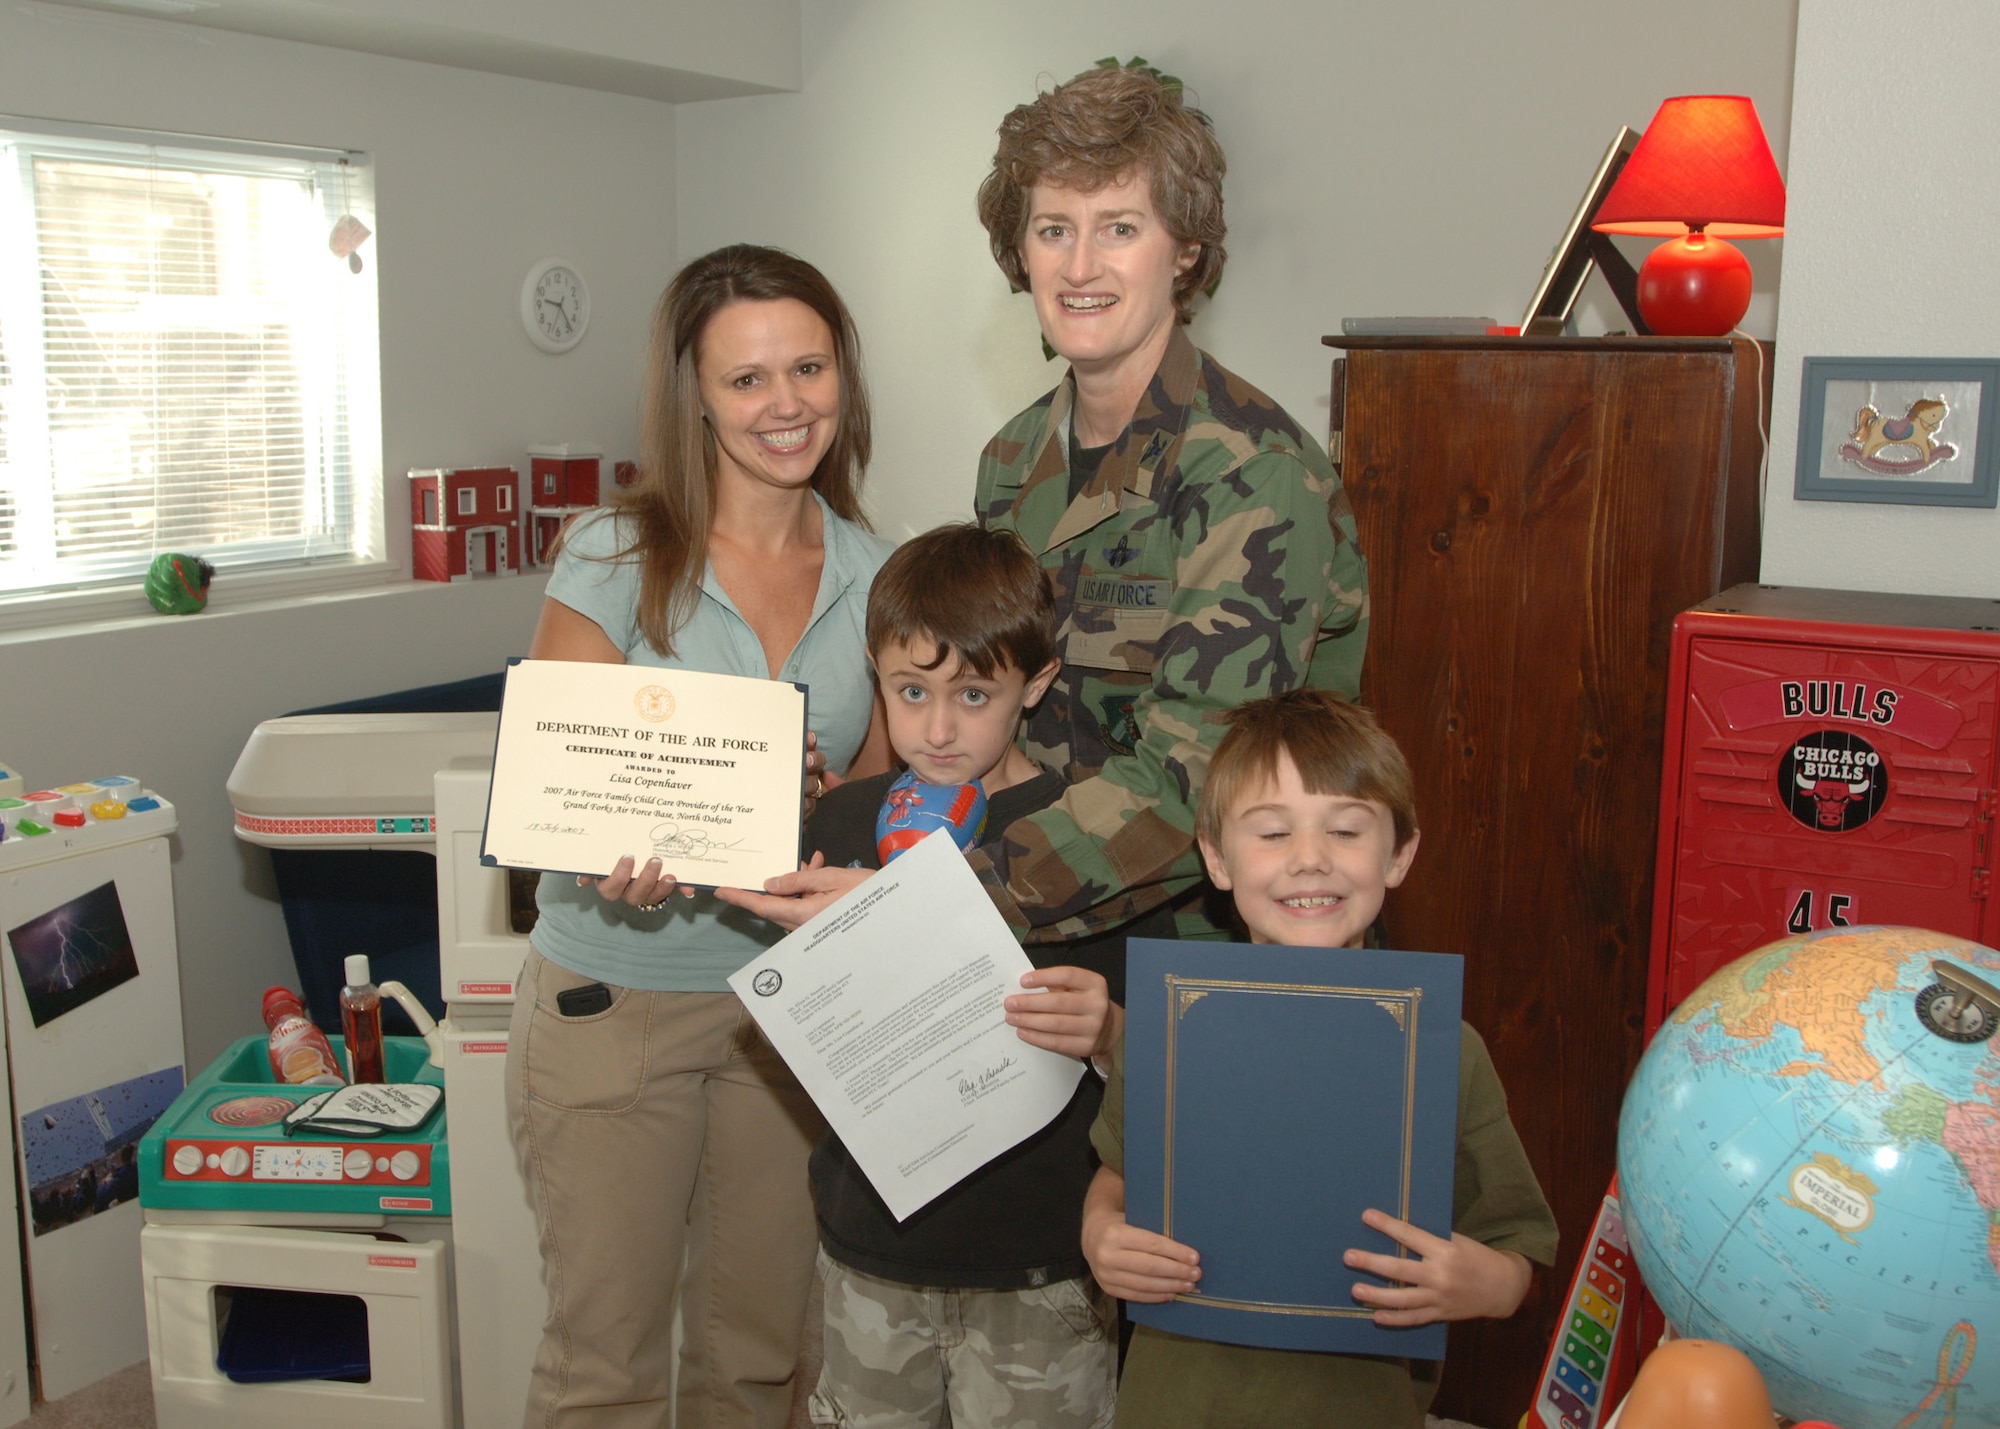 GRAND FORKS AIR FORCE BASE, N.D. -- Lisa Copenhaver, an in-home childcare provider, is presented a certificate of achievement, from Col. Carla Gammon, 319th Mission Support Group Commander, September 26,  2007 for her efforts as a family child care provider. Mrs. Copenhaver won the prestigious Air Force Family Child Care Provider of the Year, Air Mobility Command Family Child Care Provider of the Year, and Grand Forks Family Child Care Provider of the Year awards. (U.S. Air Force phot/Airman 1st Class Chad Kellum)
